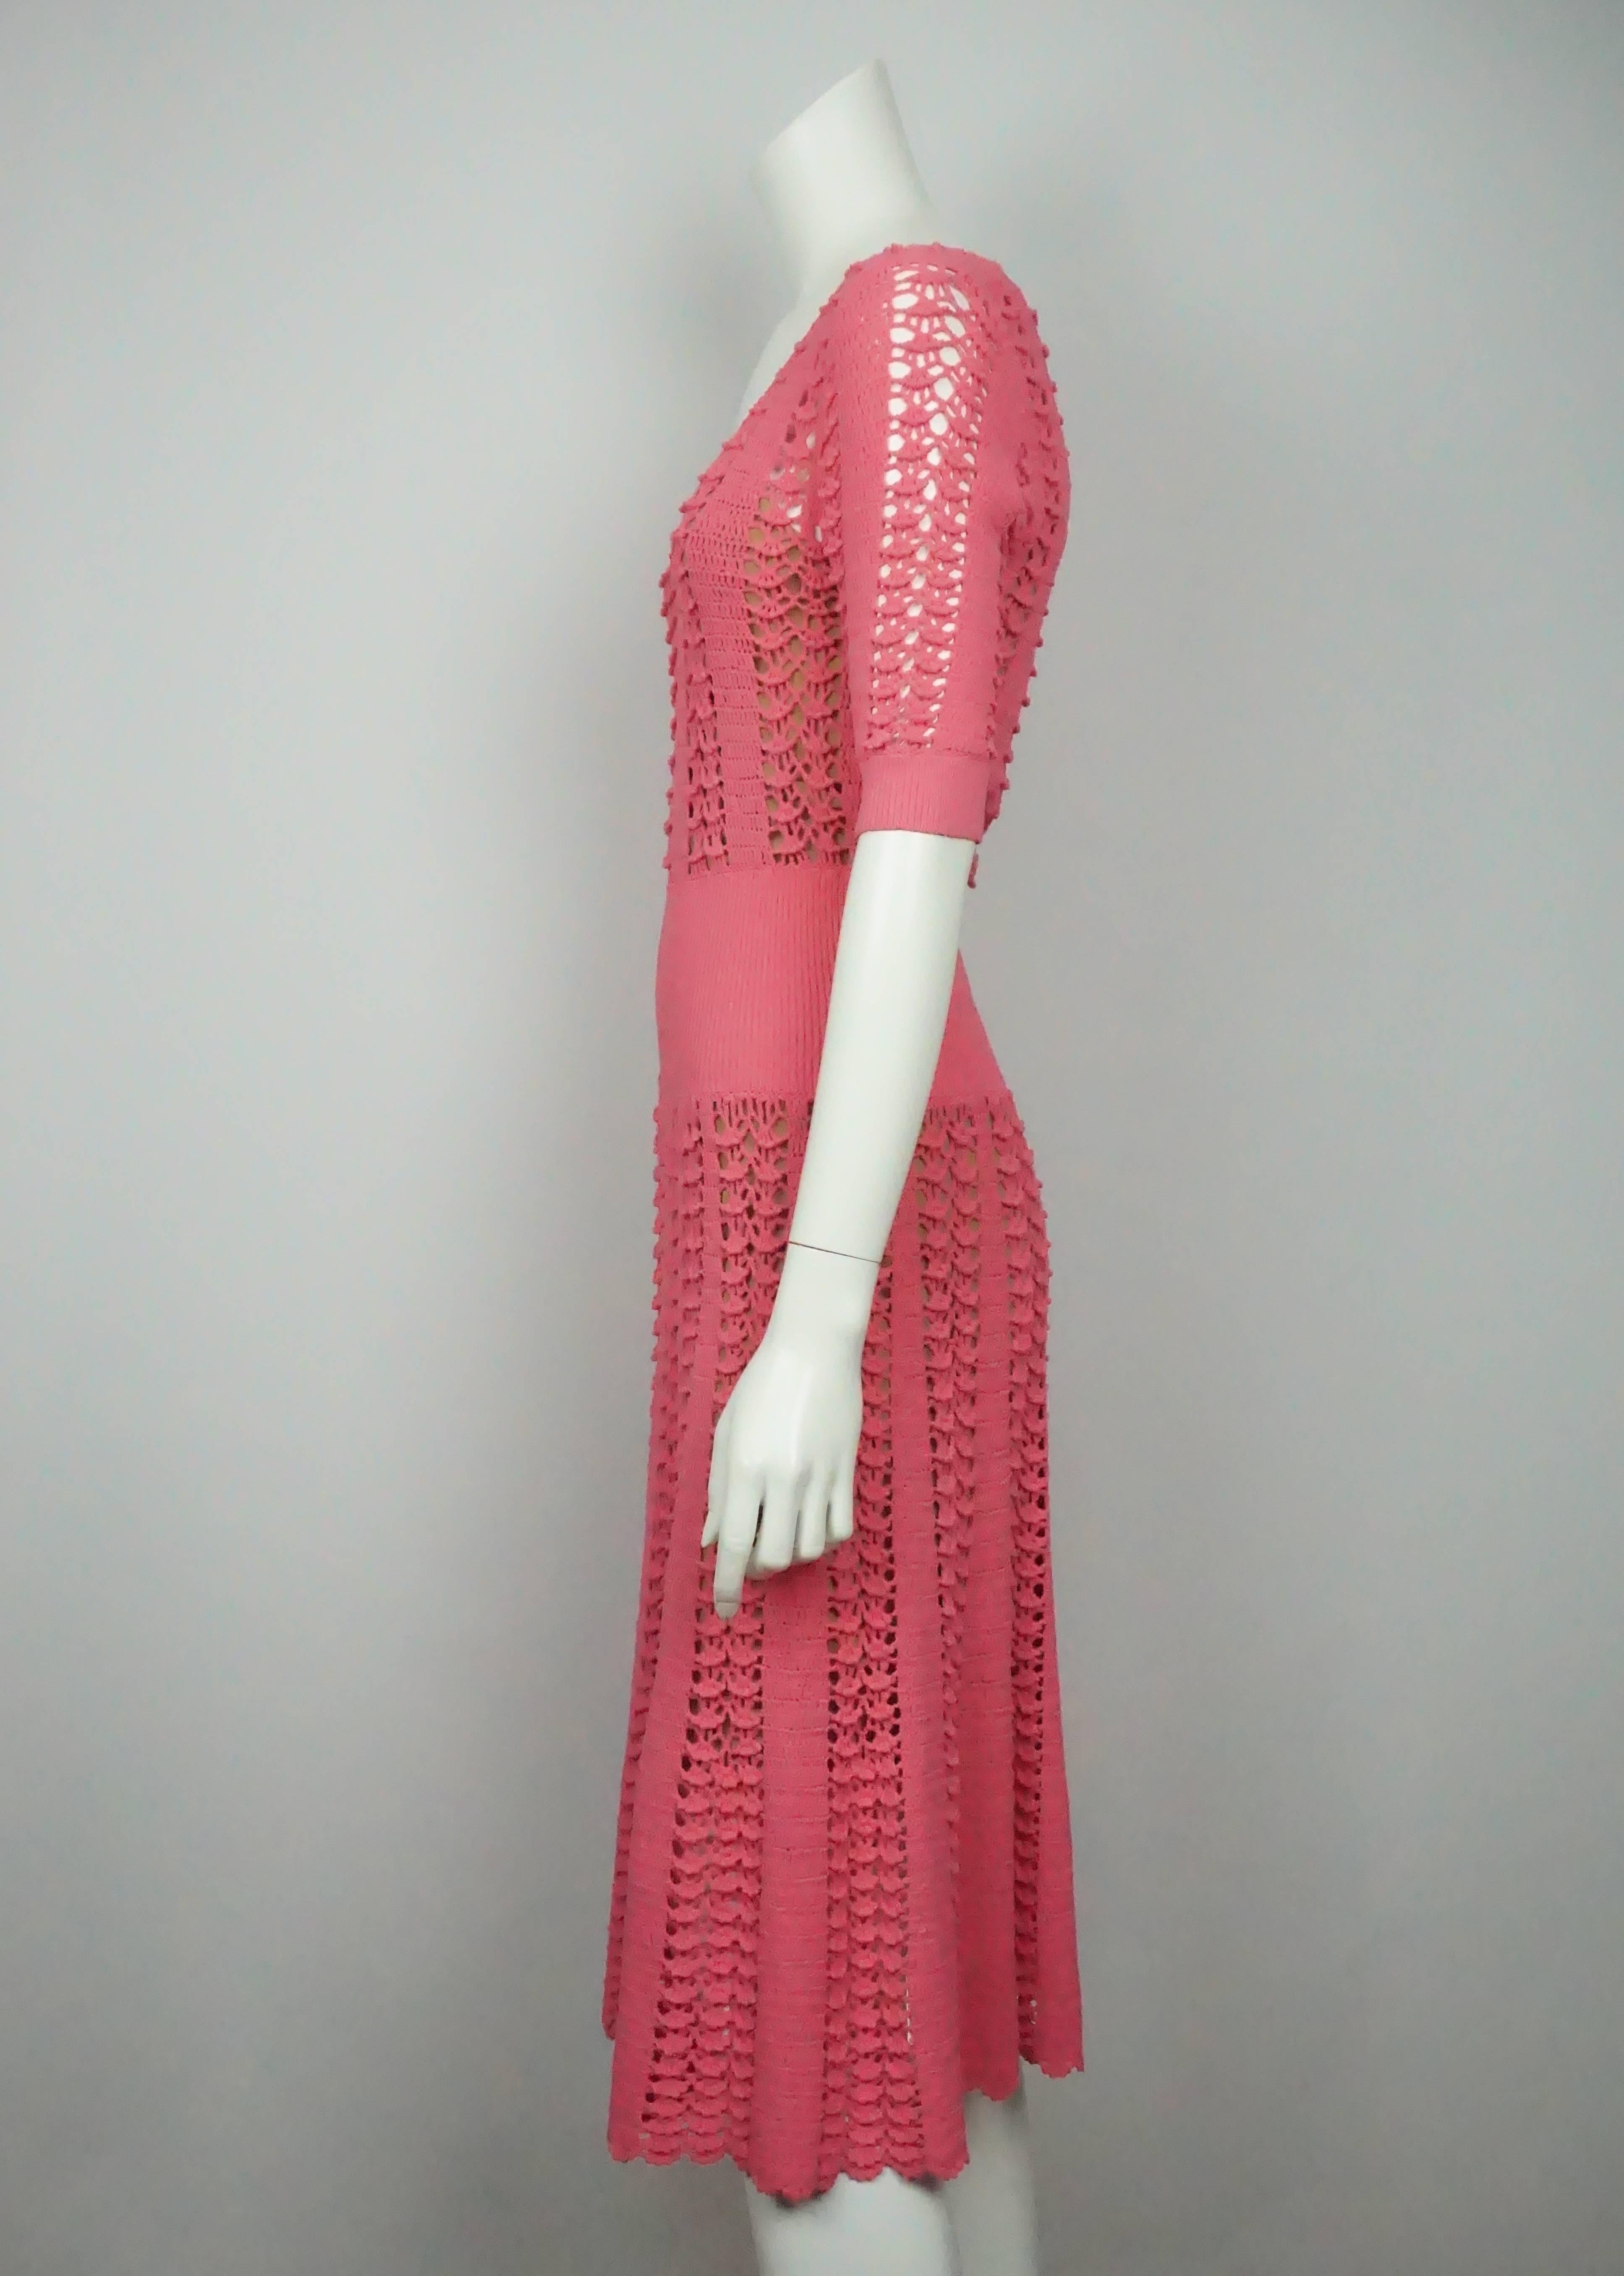 Michael Kors Pink Knit Dress - Small  This unique dress is in excellent condition. It is made out of a viscose and polyester material. There is a nude slip underneath the dress since it has small cutouts throughout the dress. The dress has a small